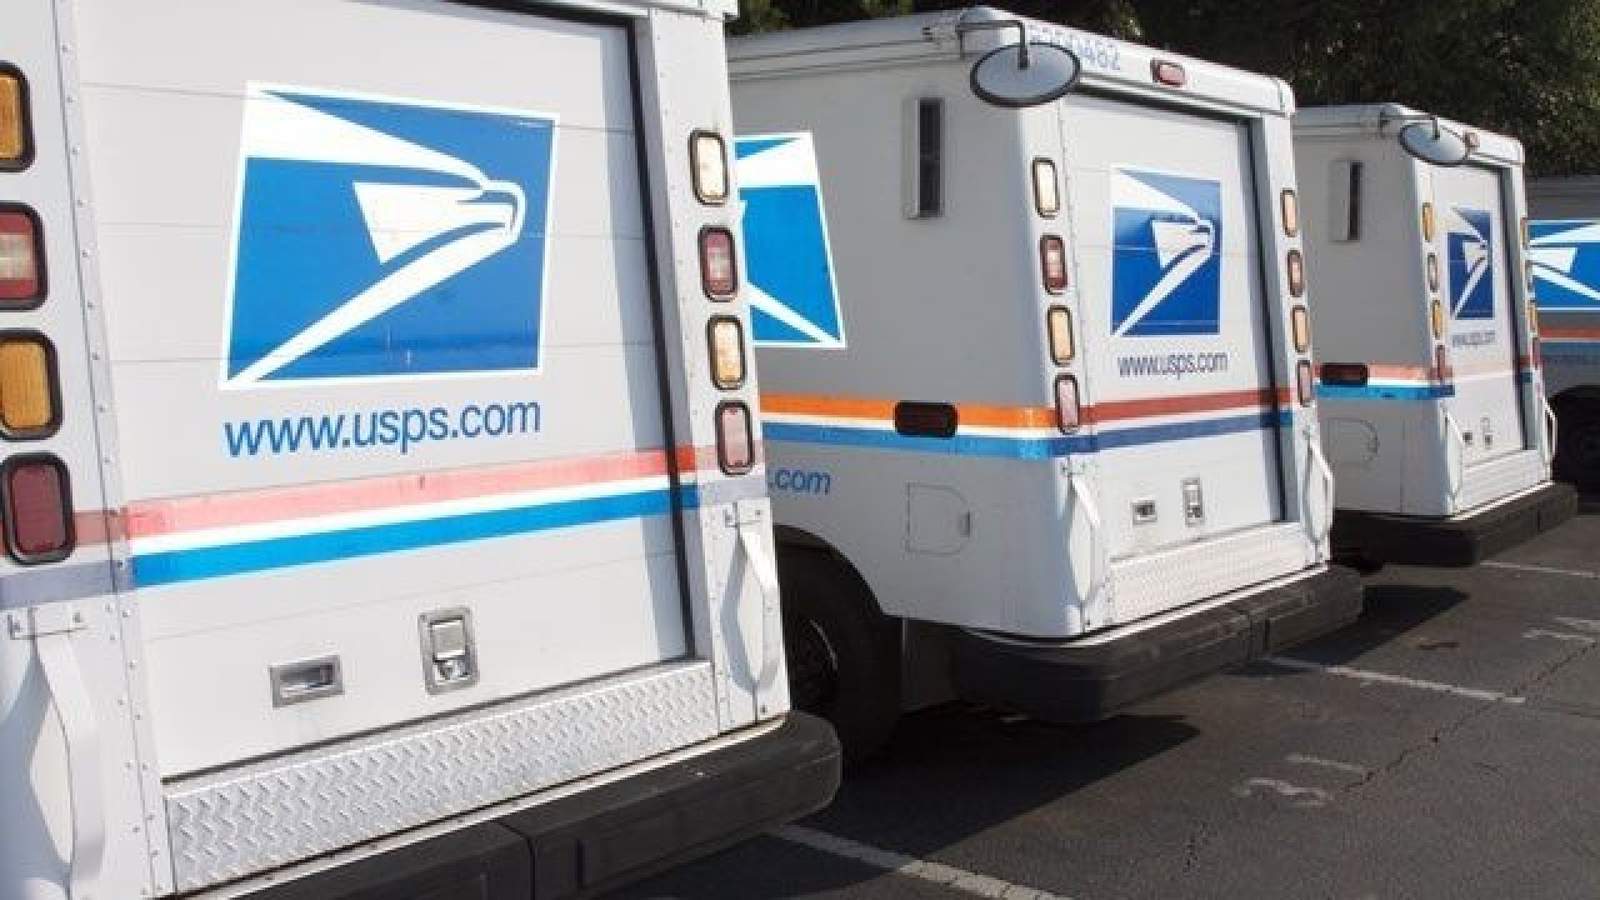 Free USPS program will alert you when your stimulus check is coming